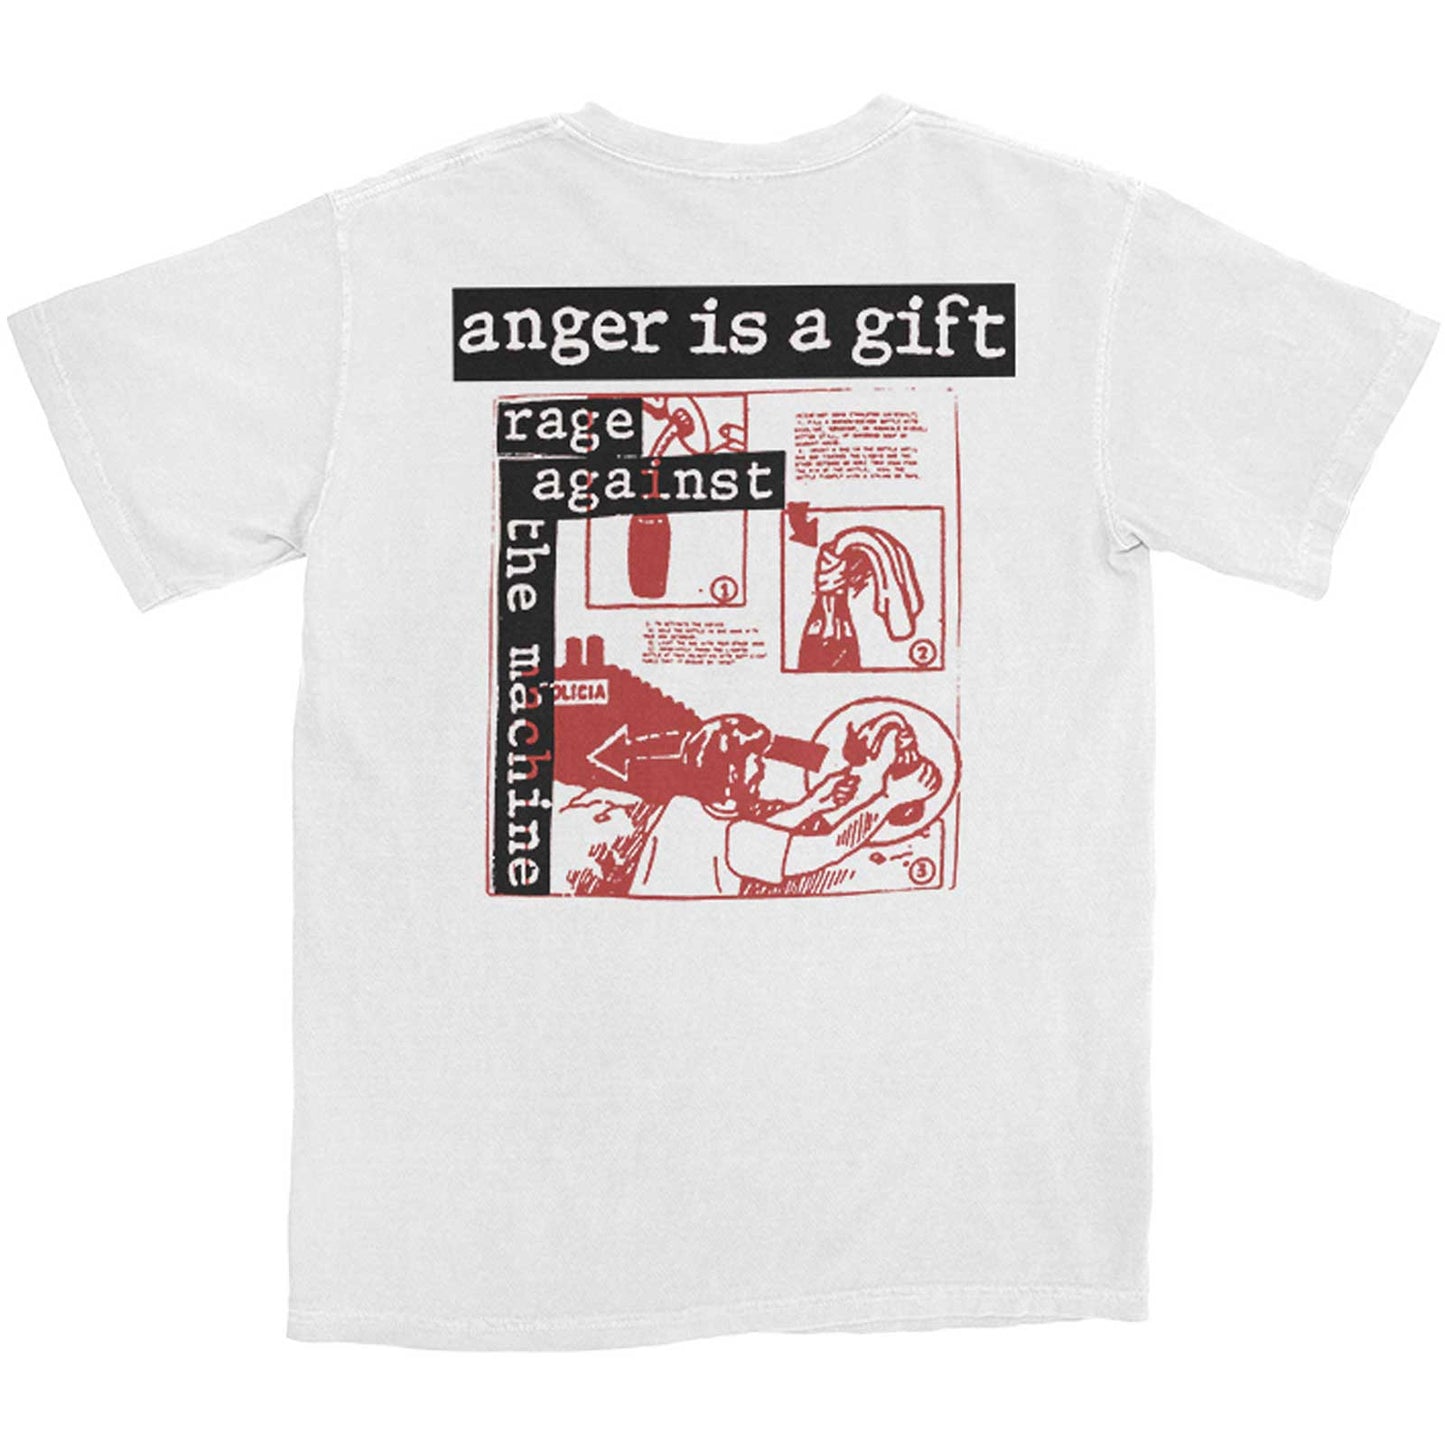 RAGE AGAINST THE MACHINE - Anger Is A Gift Backprint T-Shirt